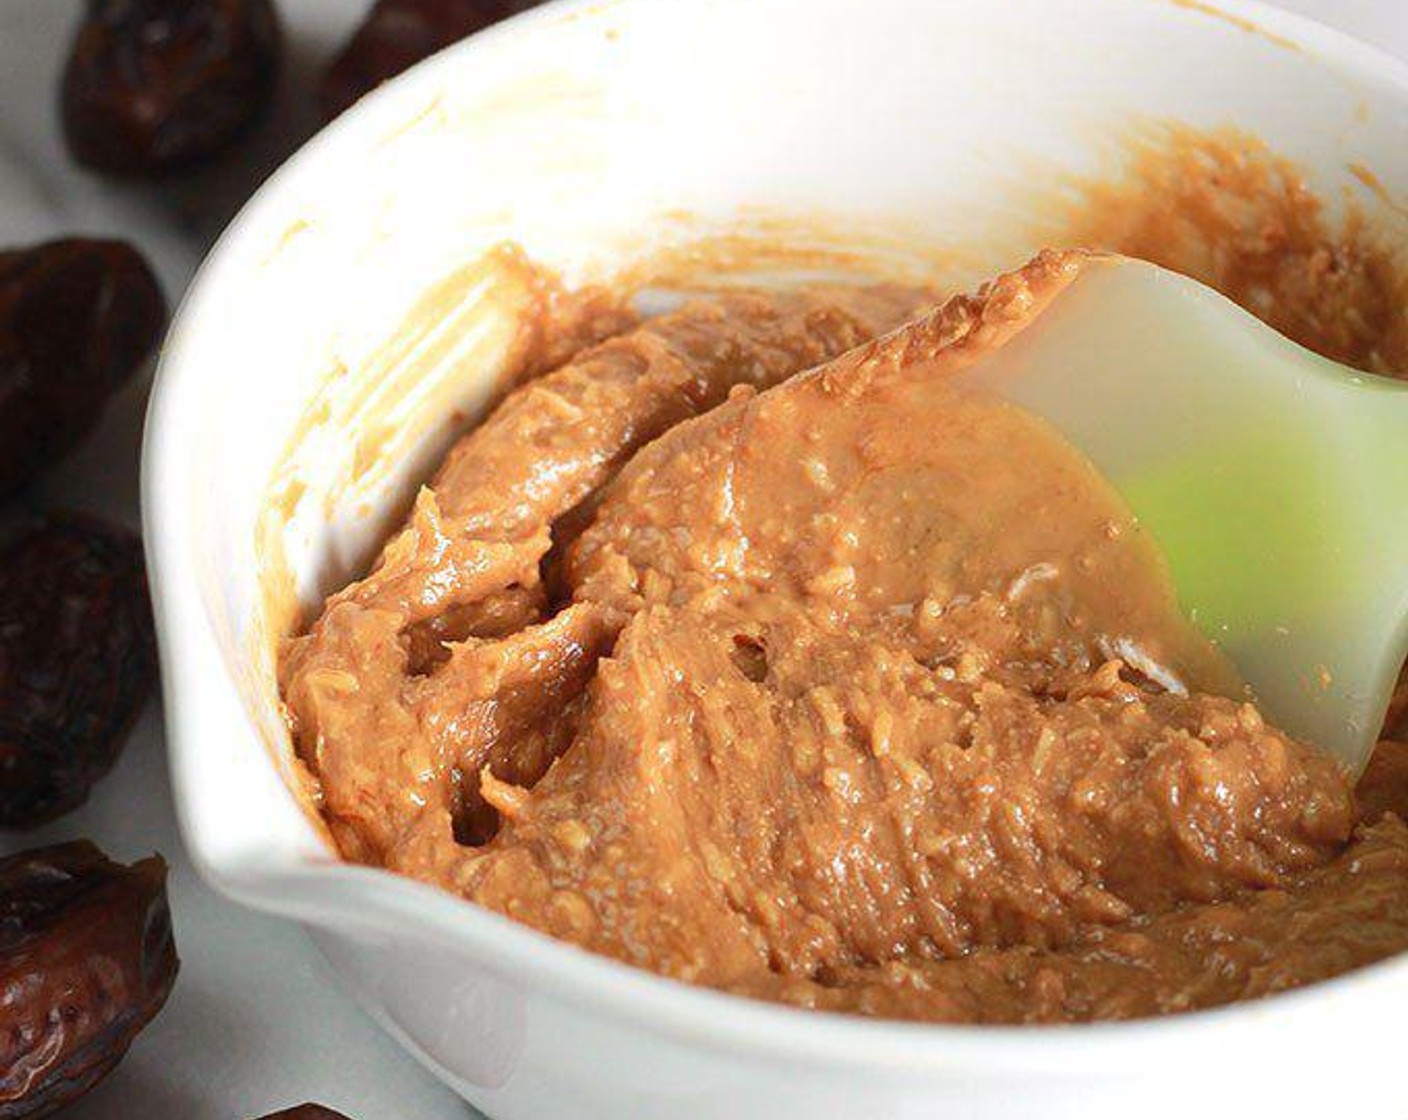 step 1 In a medium bowl, combine Nut Butter (1 cup) and Unsweetened Coconut Flakes (1/4 cup). Set aside.